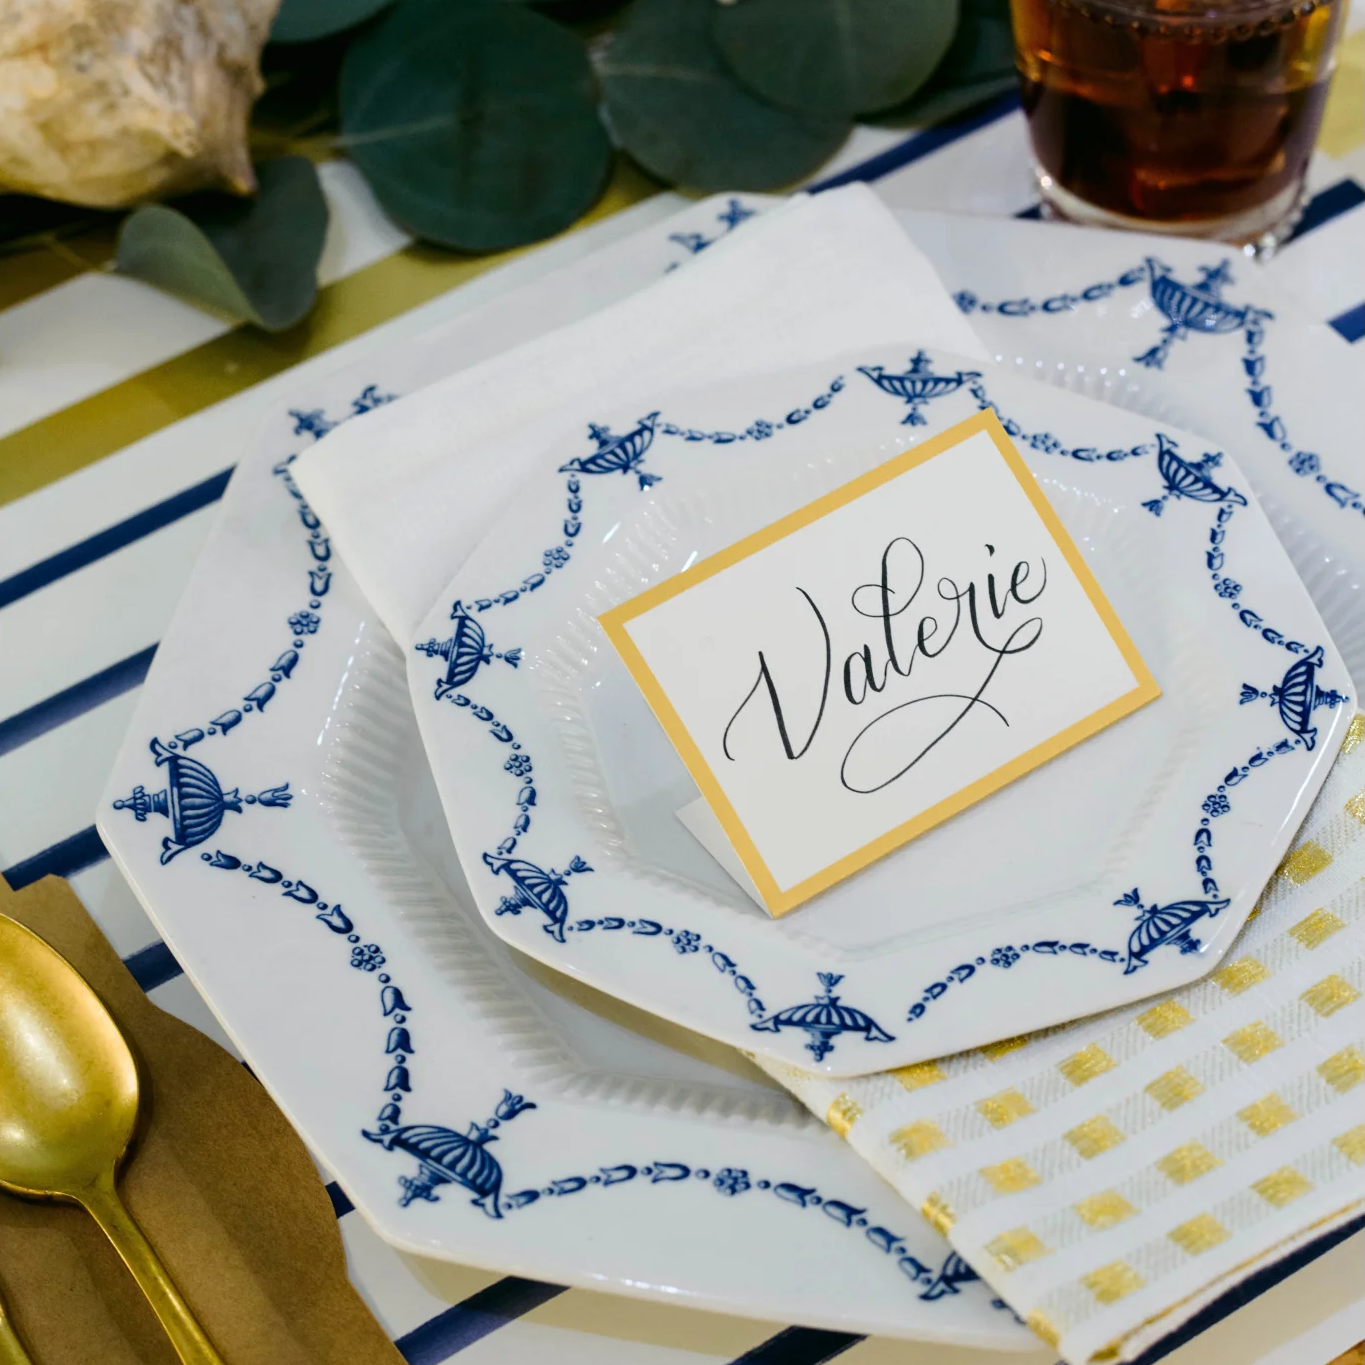 Gold Frame Place Card